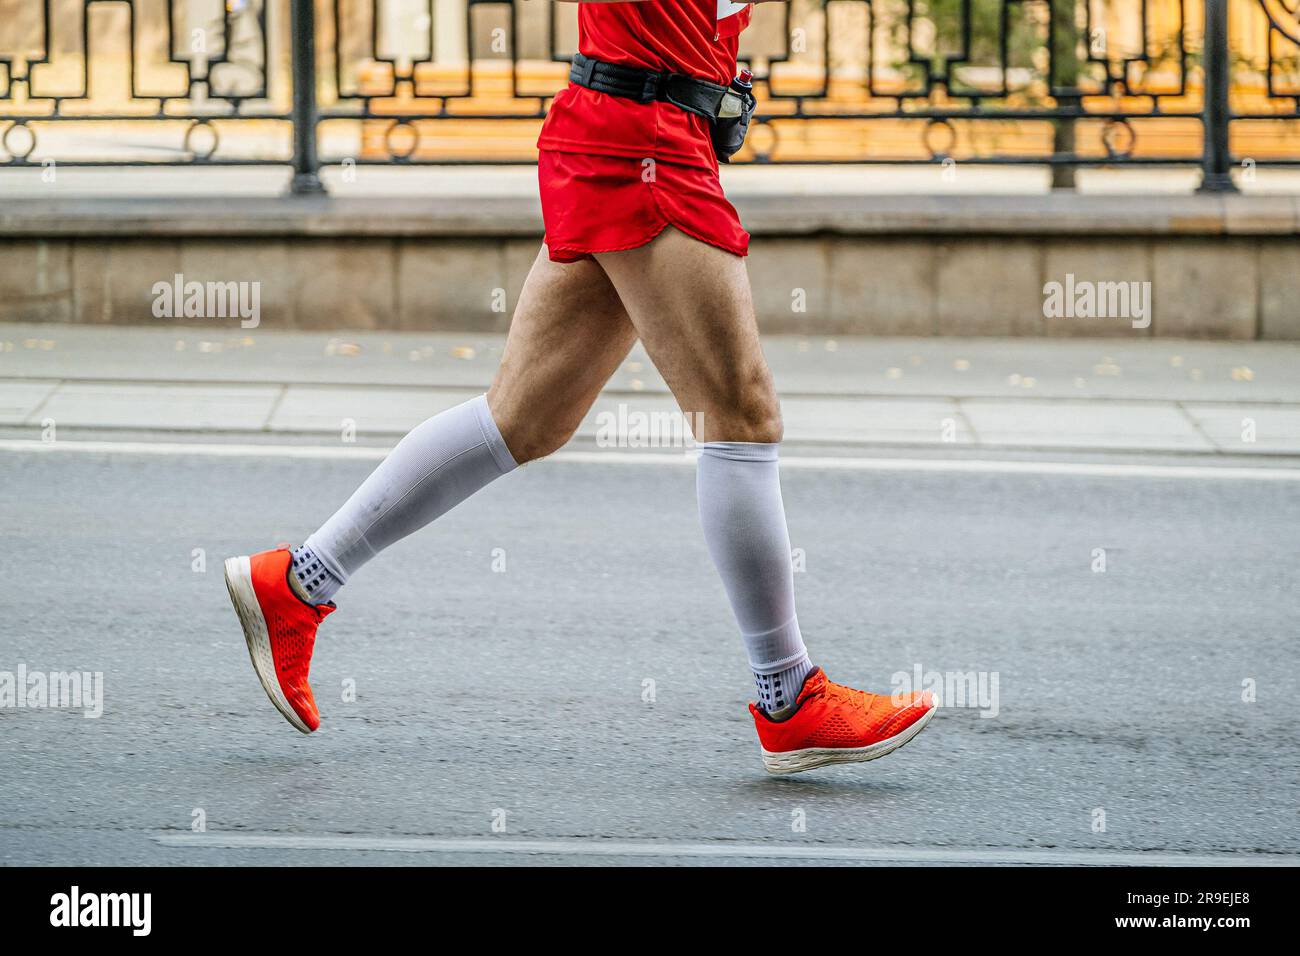 side view male runner run marathon race in white compression socks and bright red running shoes Stock Photo